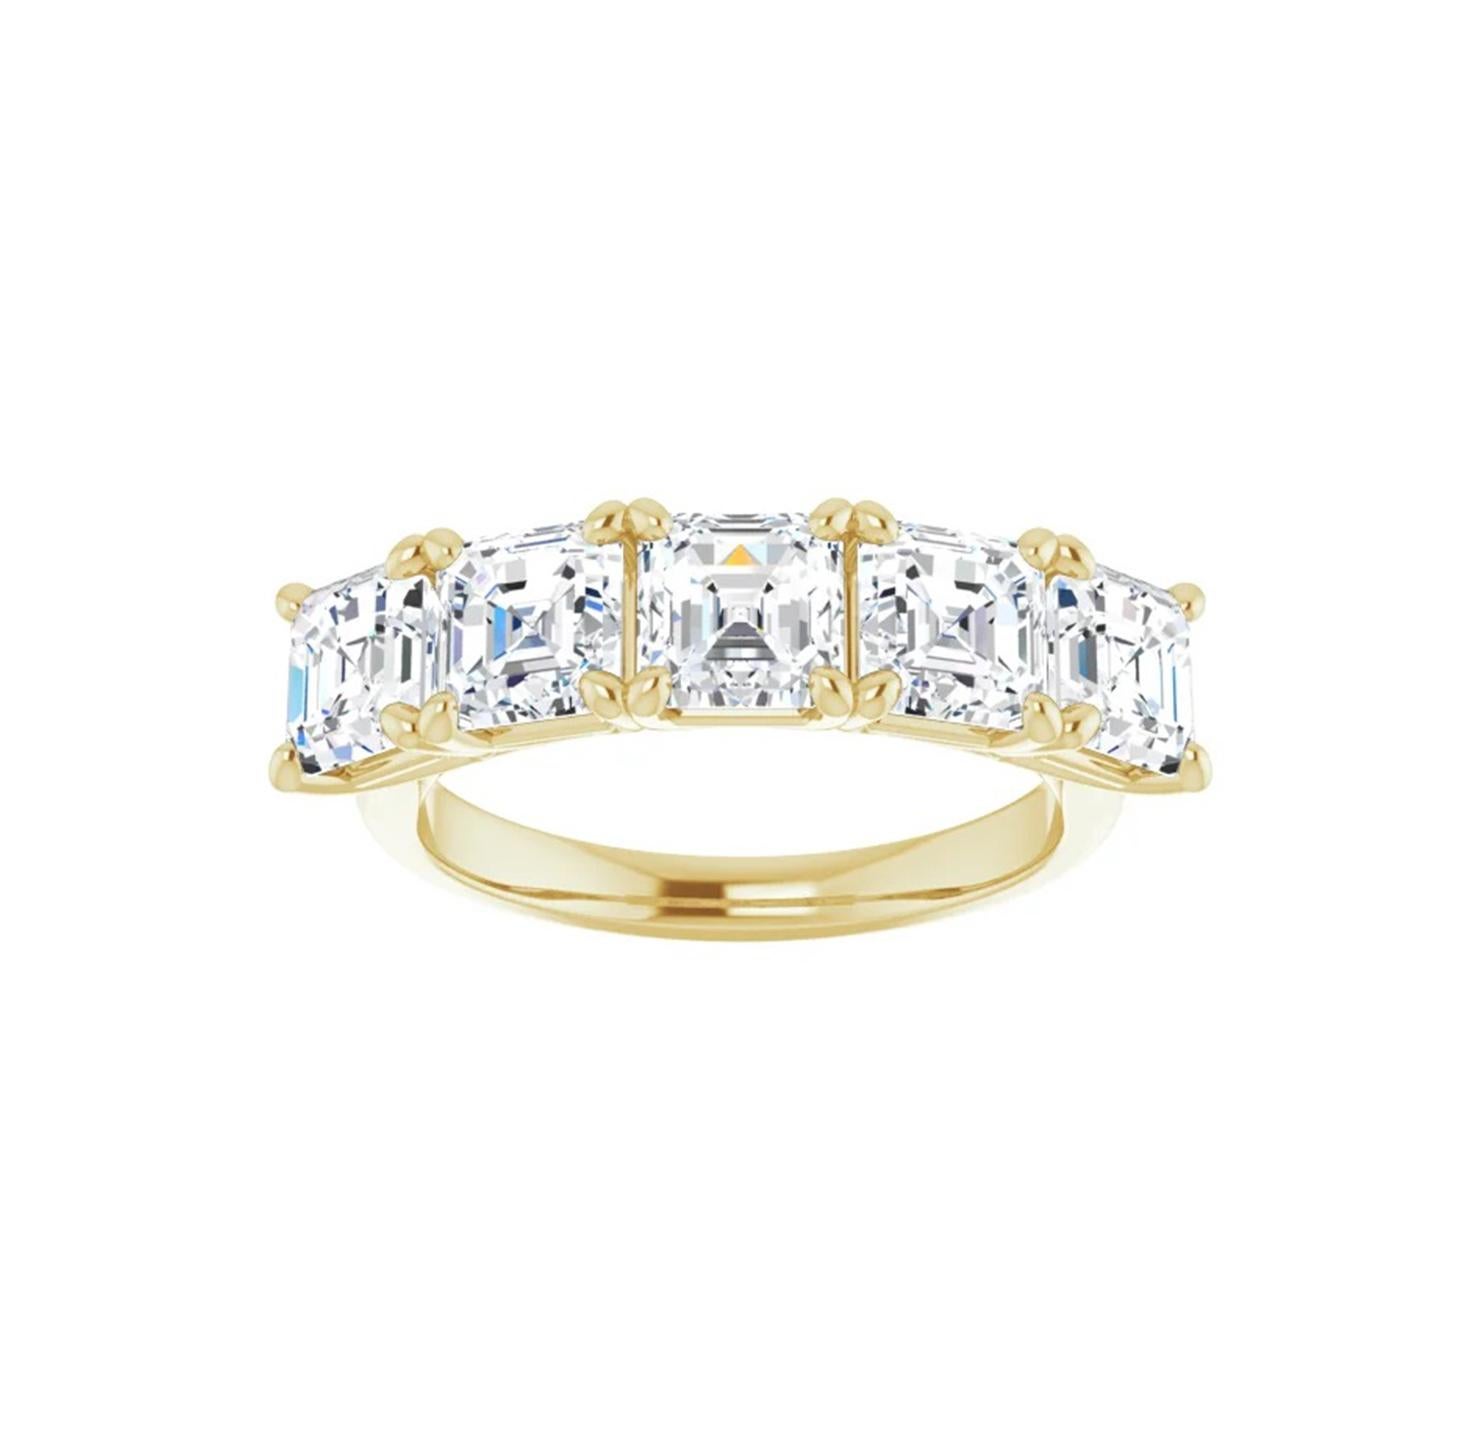 This diamond band has five stunning Asscher diamonds that each measure between 5 to 5.5 mm each and have a color and clarity ranging between G-E and a clarity of VS.  Each Asscher cut diamond is set in a four prong head.  This style of ring has a